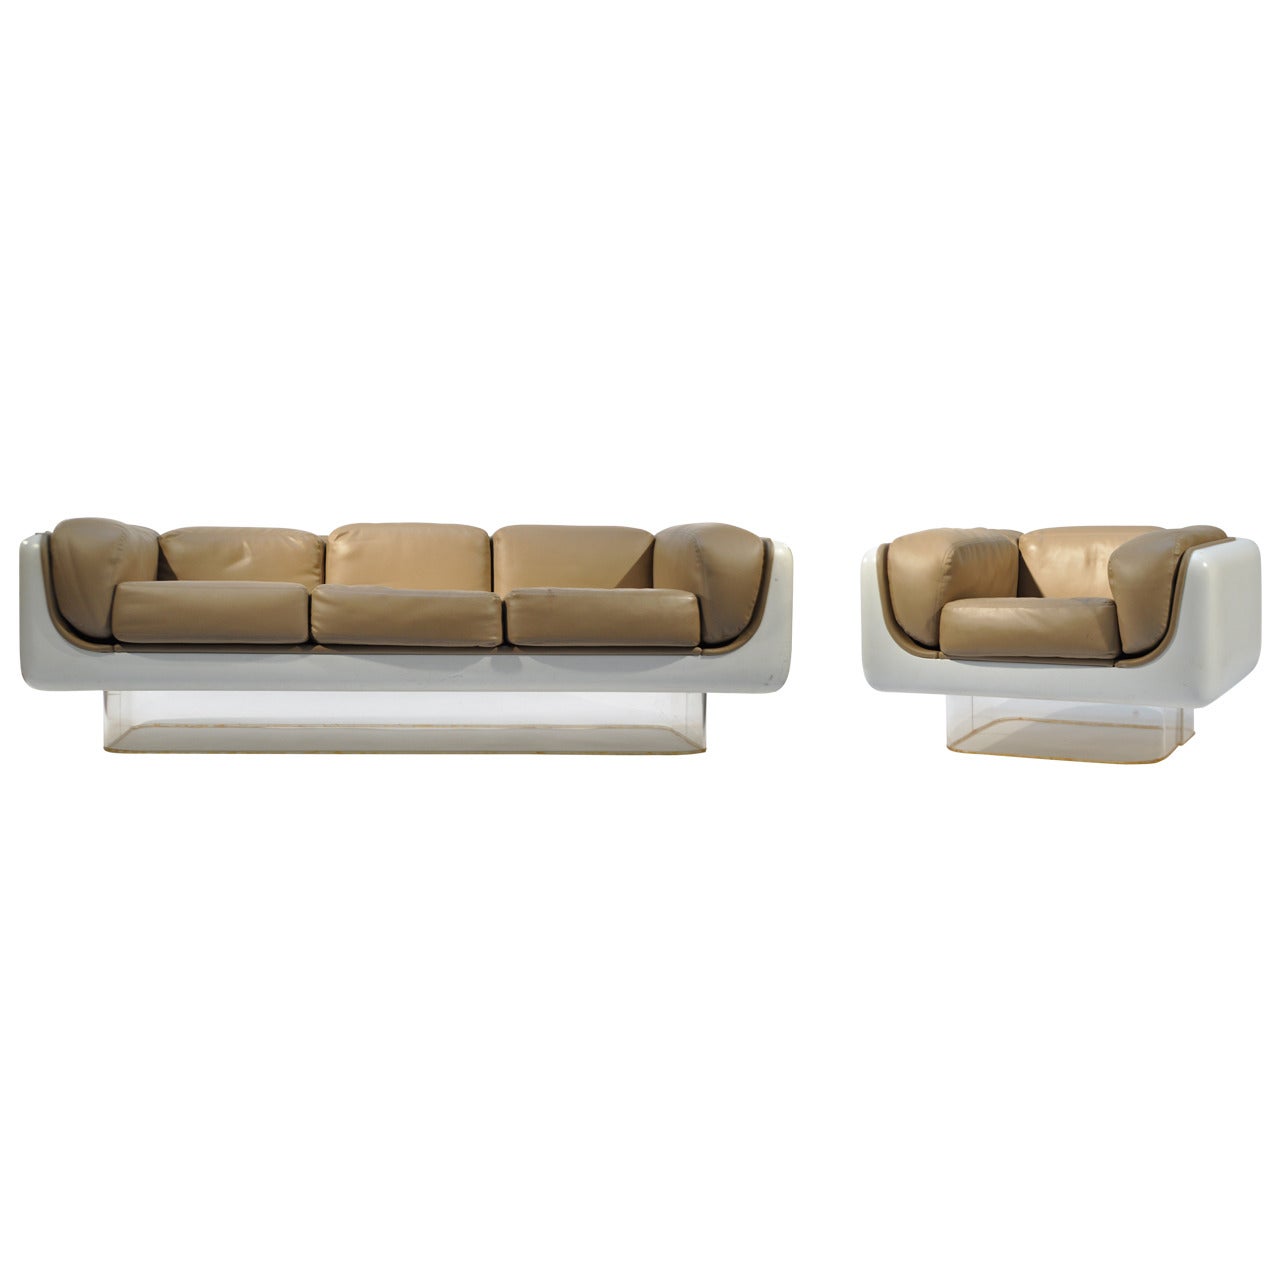 Pair of Warren Platner "Soft Seating" Sofa and Lounge For Sale